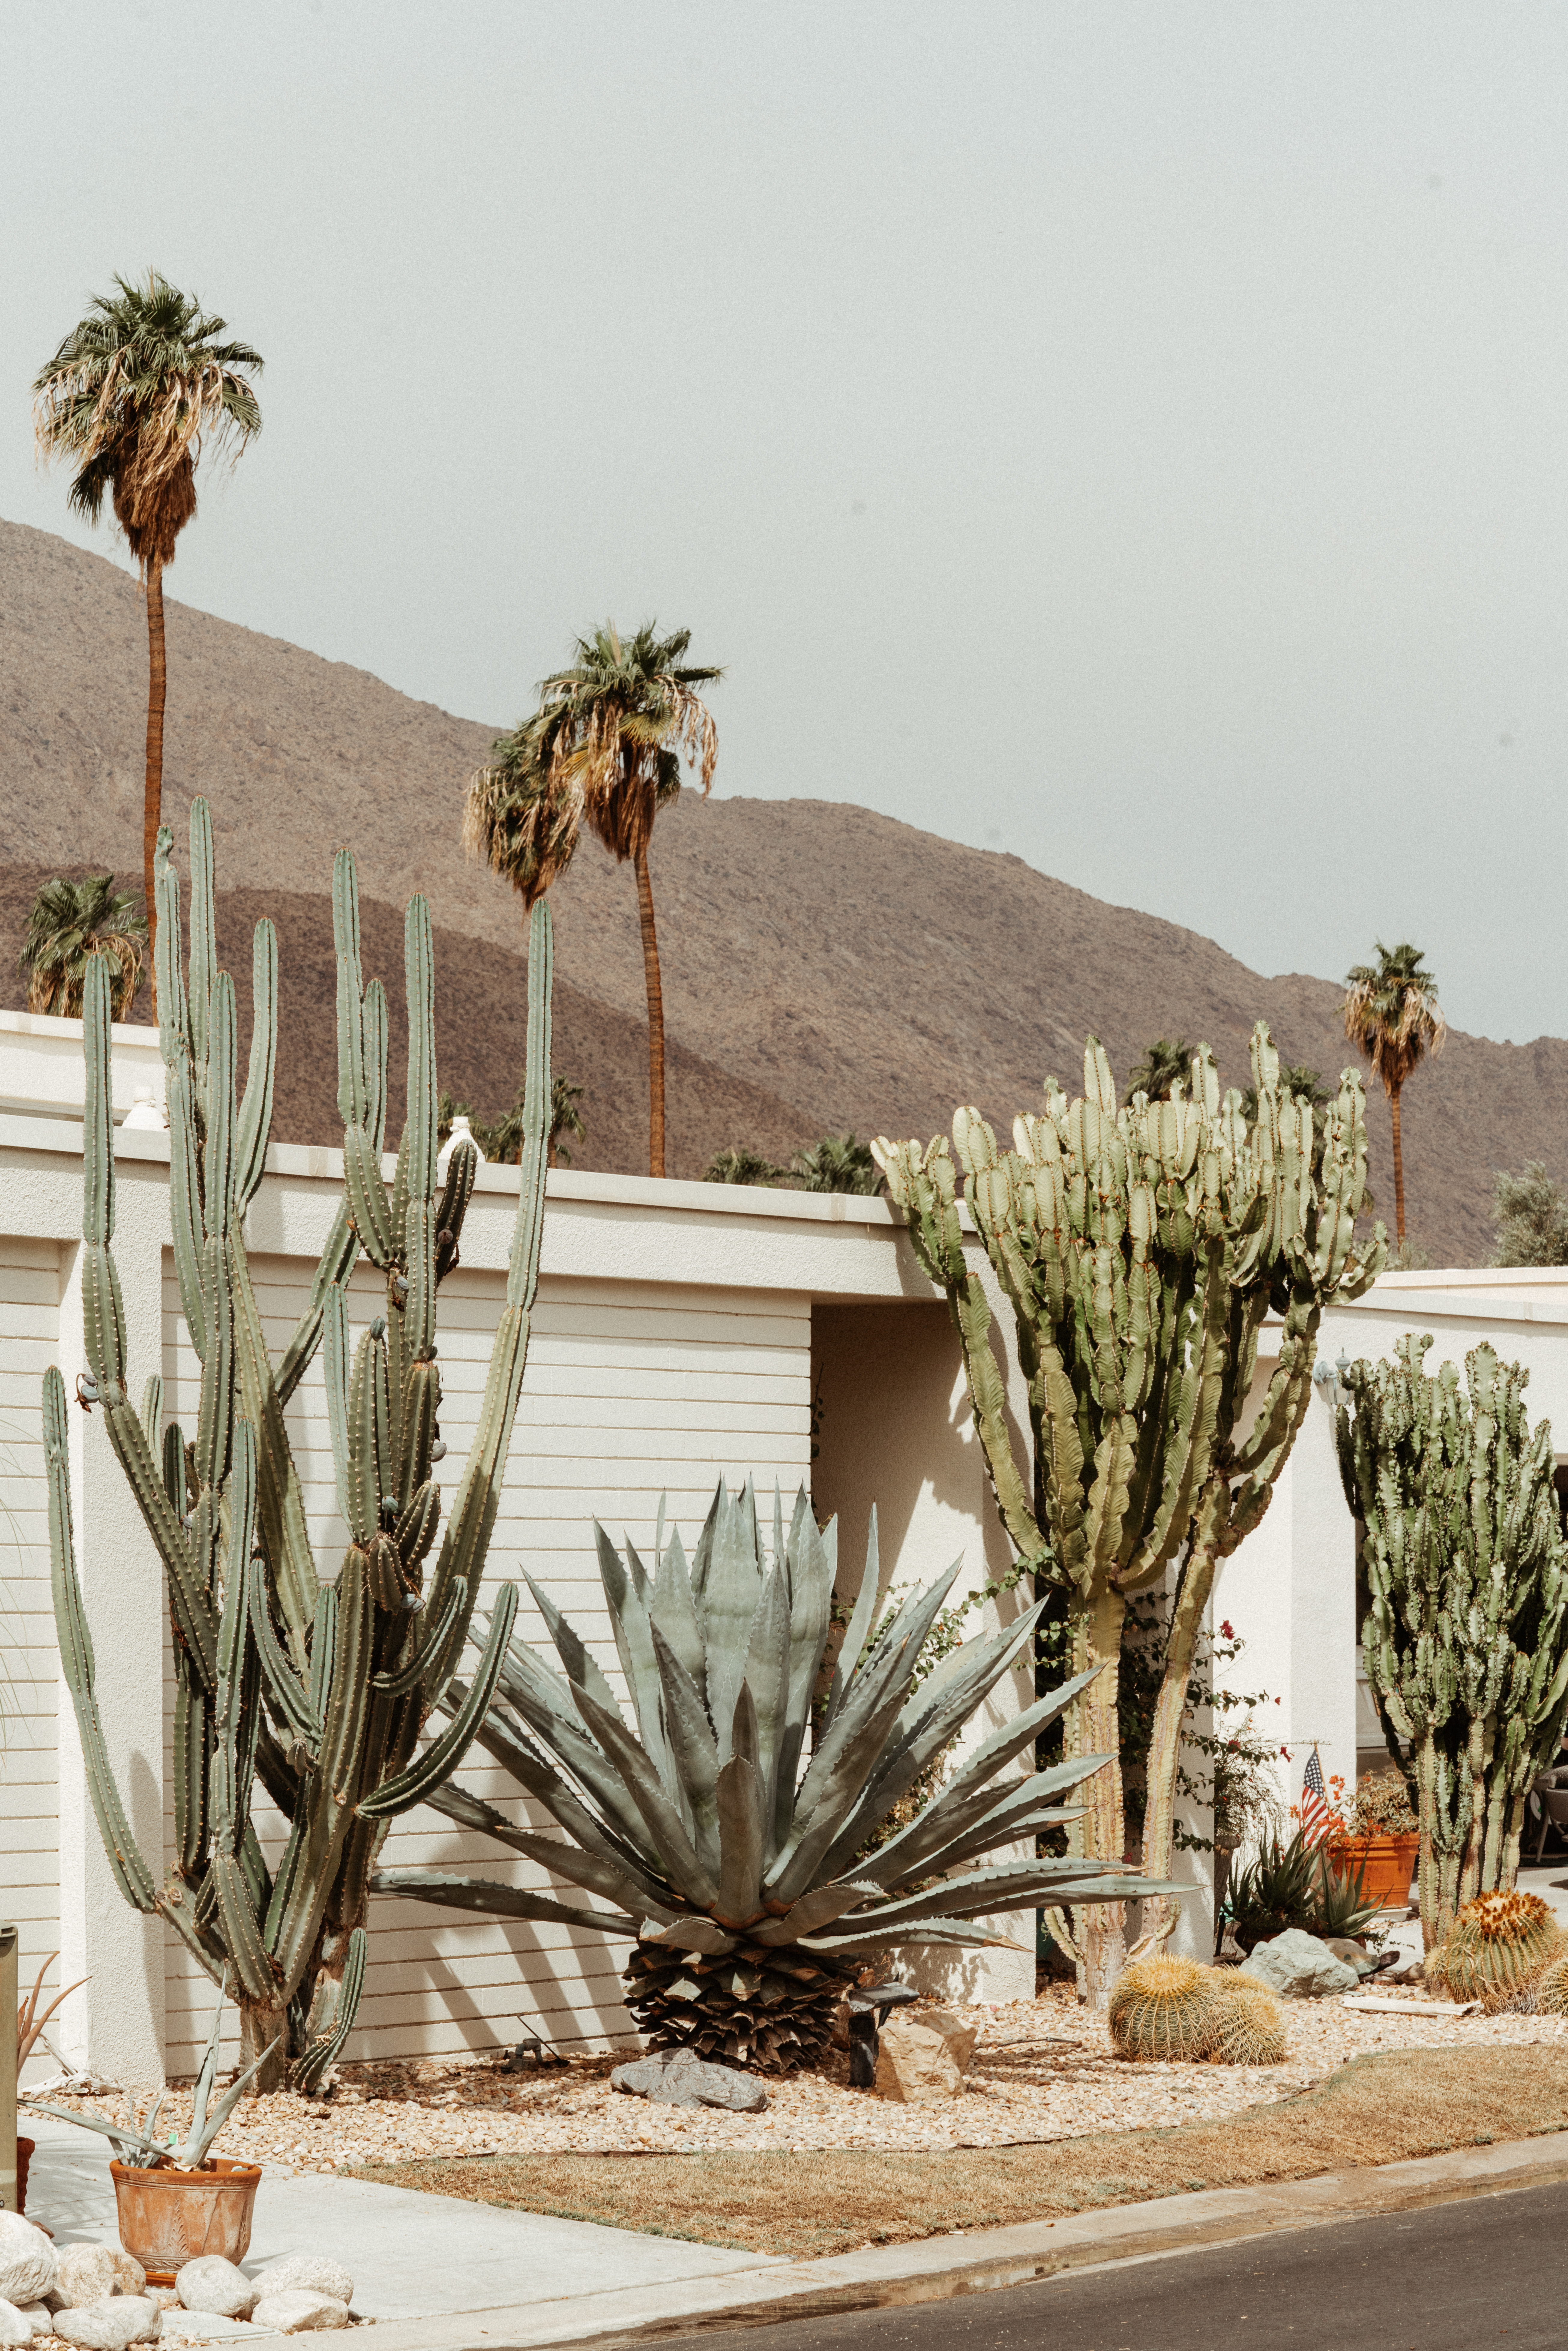 Cactus gardens Palm Springs with an incredible landscape & retro vibe